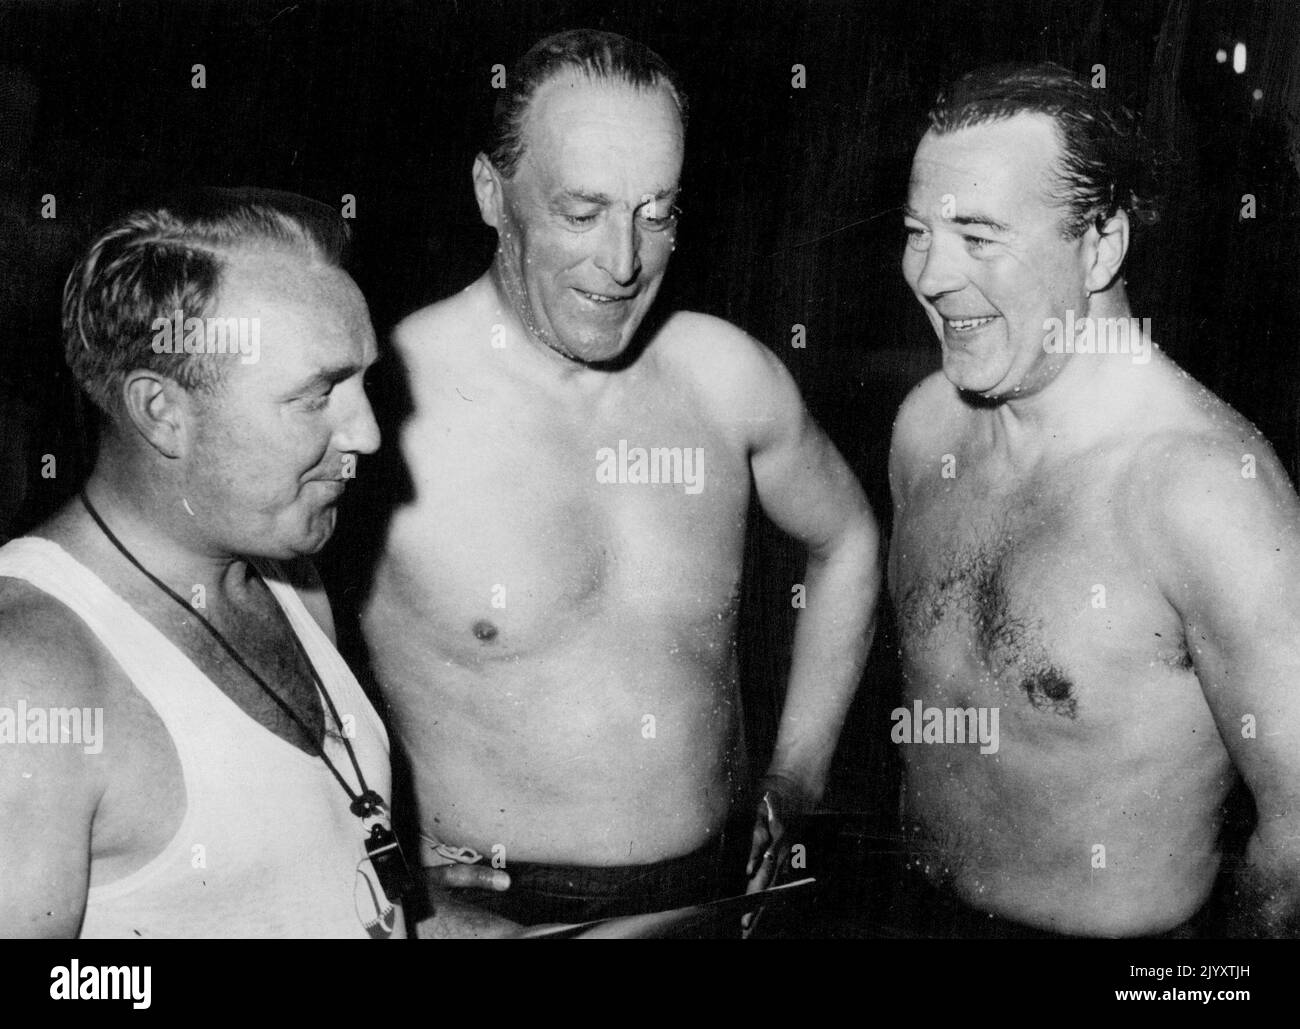 A Prince Goes Swimming Stockholm: Still wet after a swim in the Sport Palates pool here, Prince Bertil of Sweden, right, chats with swimming instructor Tage Lindstroem (left). Man in centre is Bo Ekelund. The Prince had been making a bid to gain his swimming certificate. June 14, 1951. Stock Photo